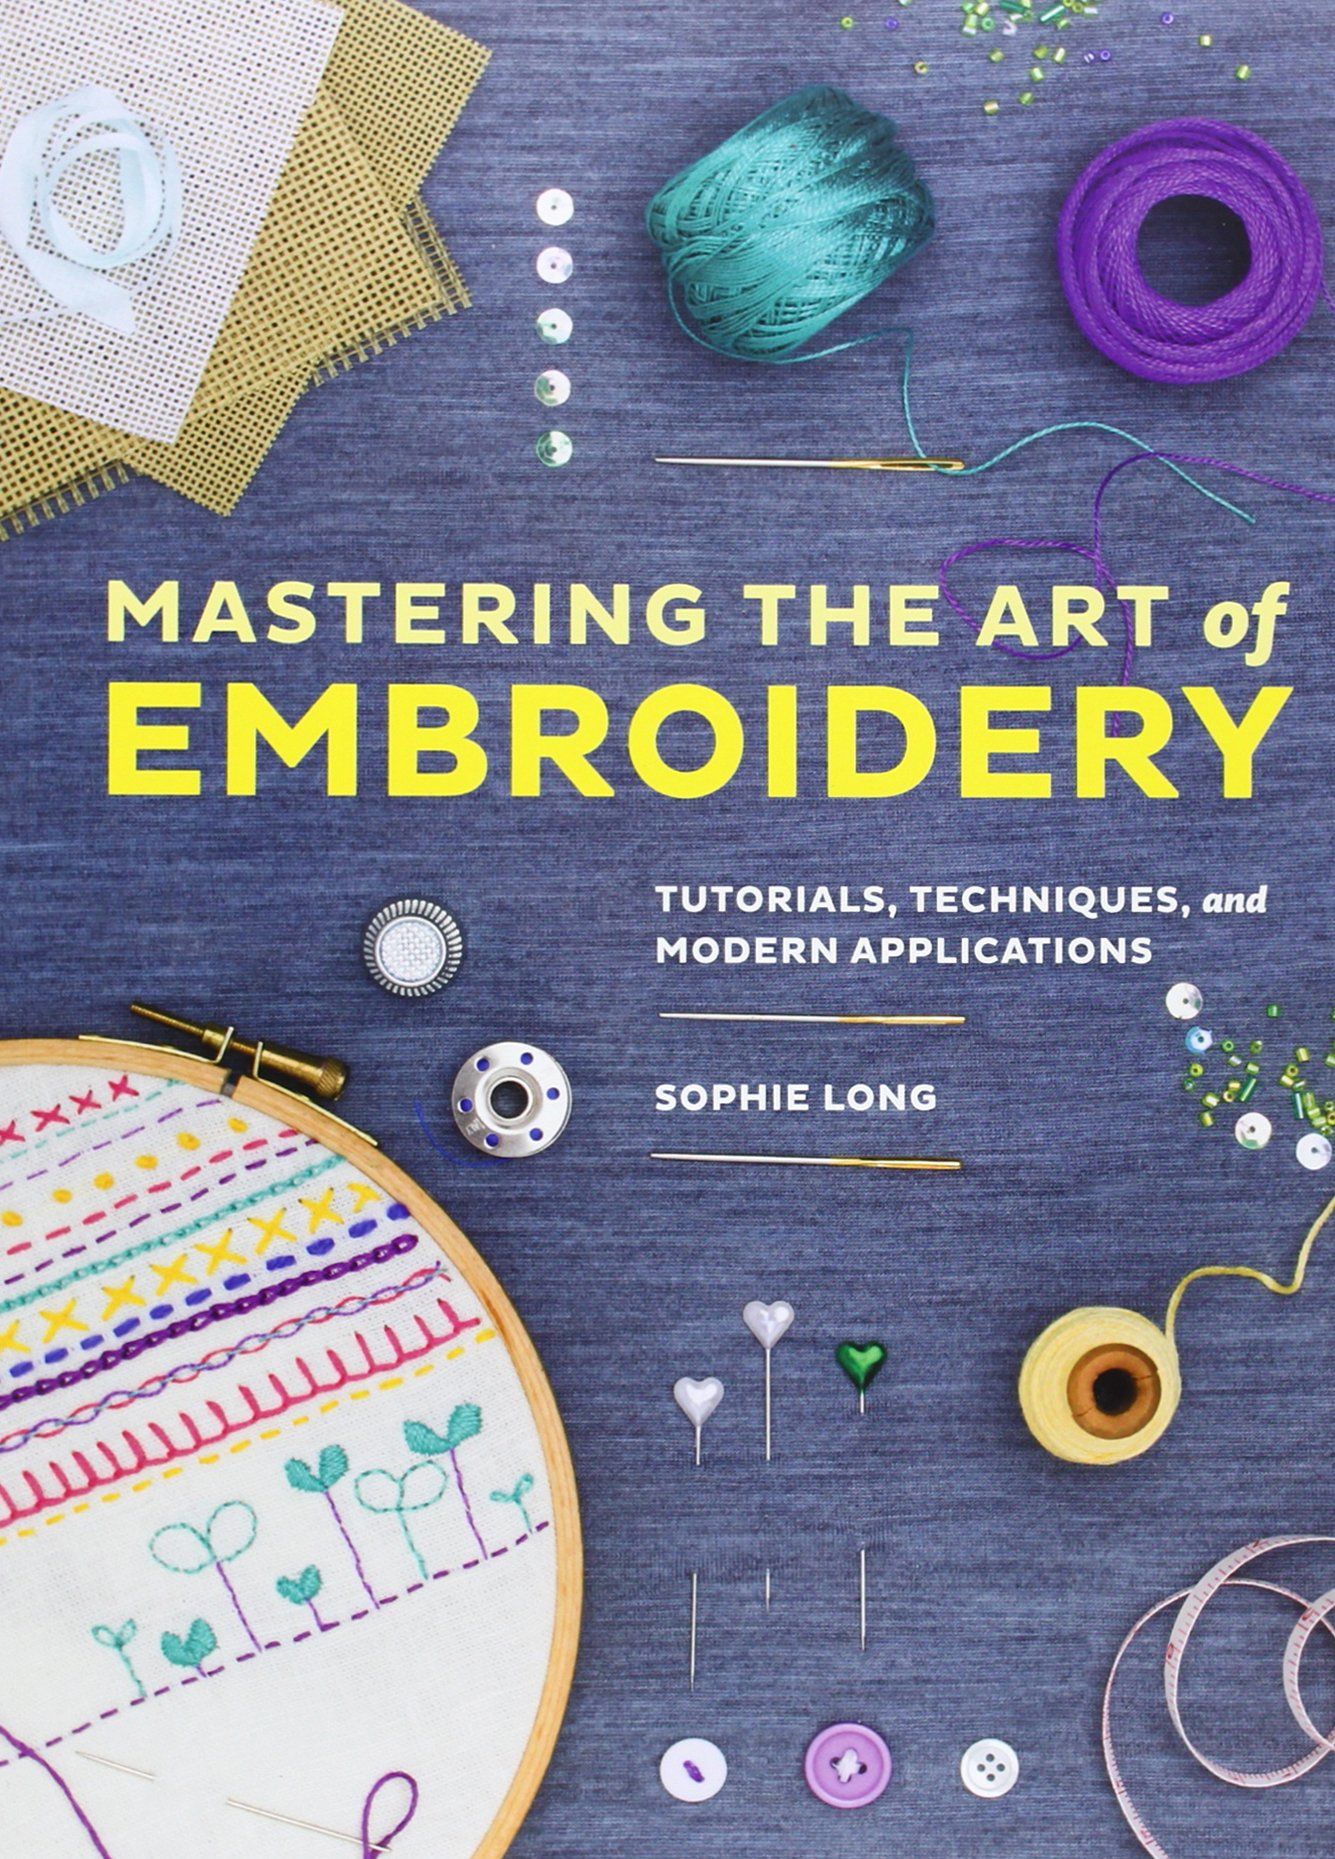 Book cover image for Mastering the Art of Embroidery